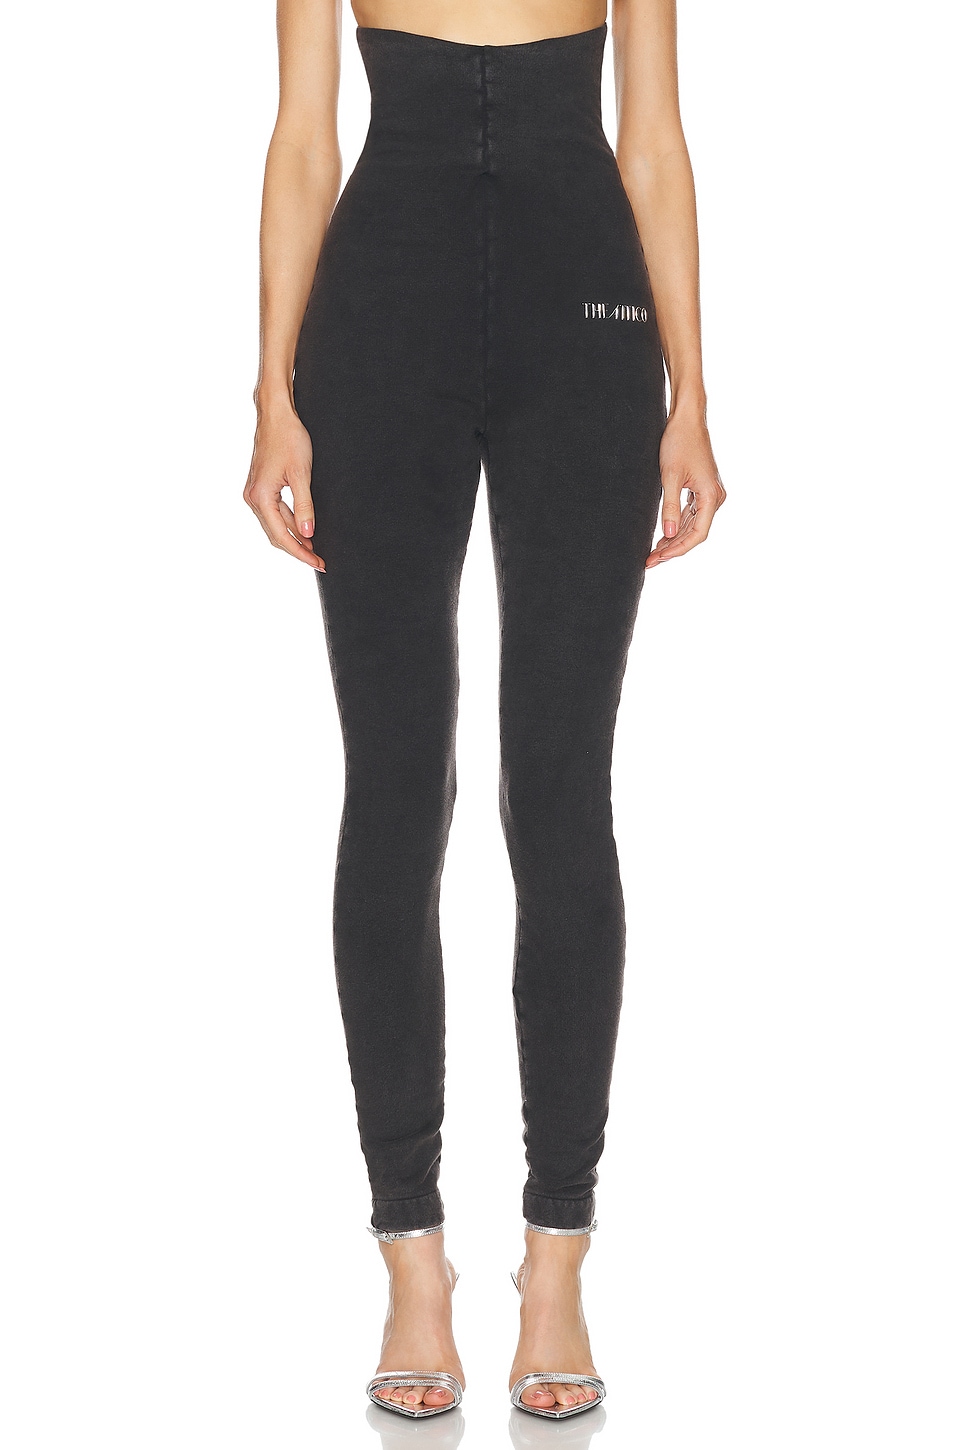 Image 1 of THE ATTICO Long Pant in Black Fade